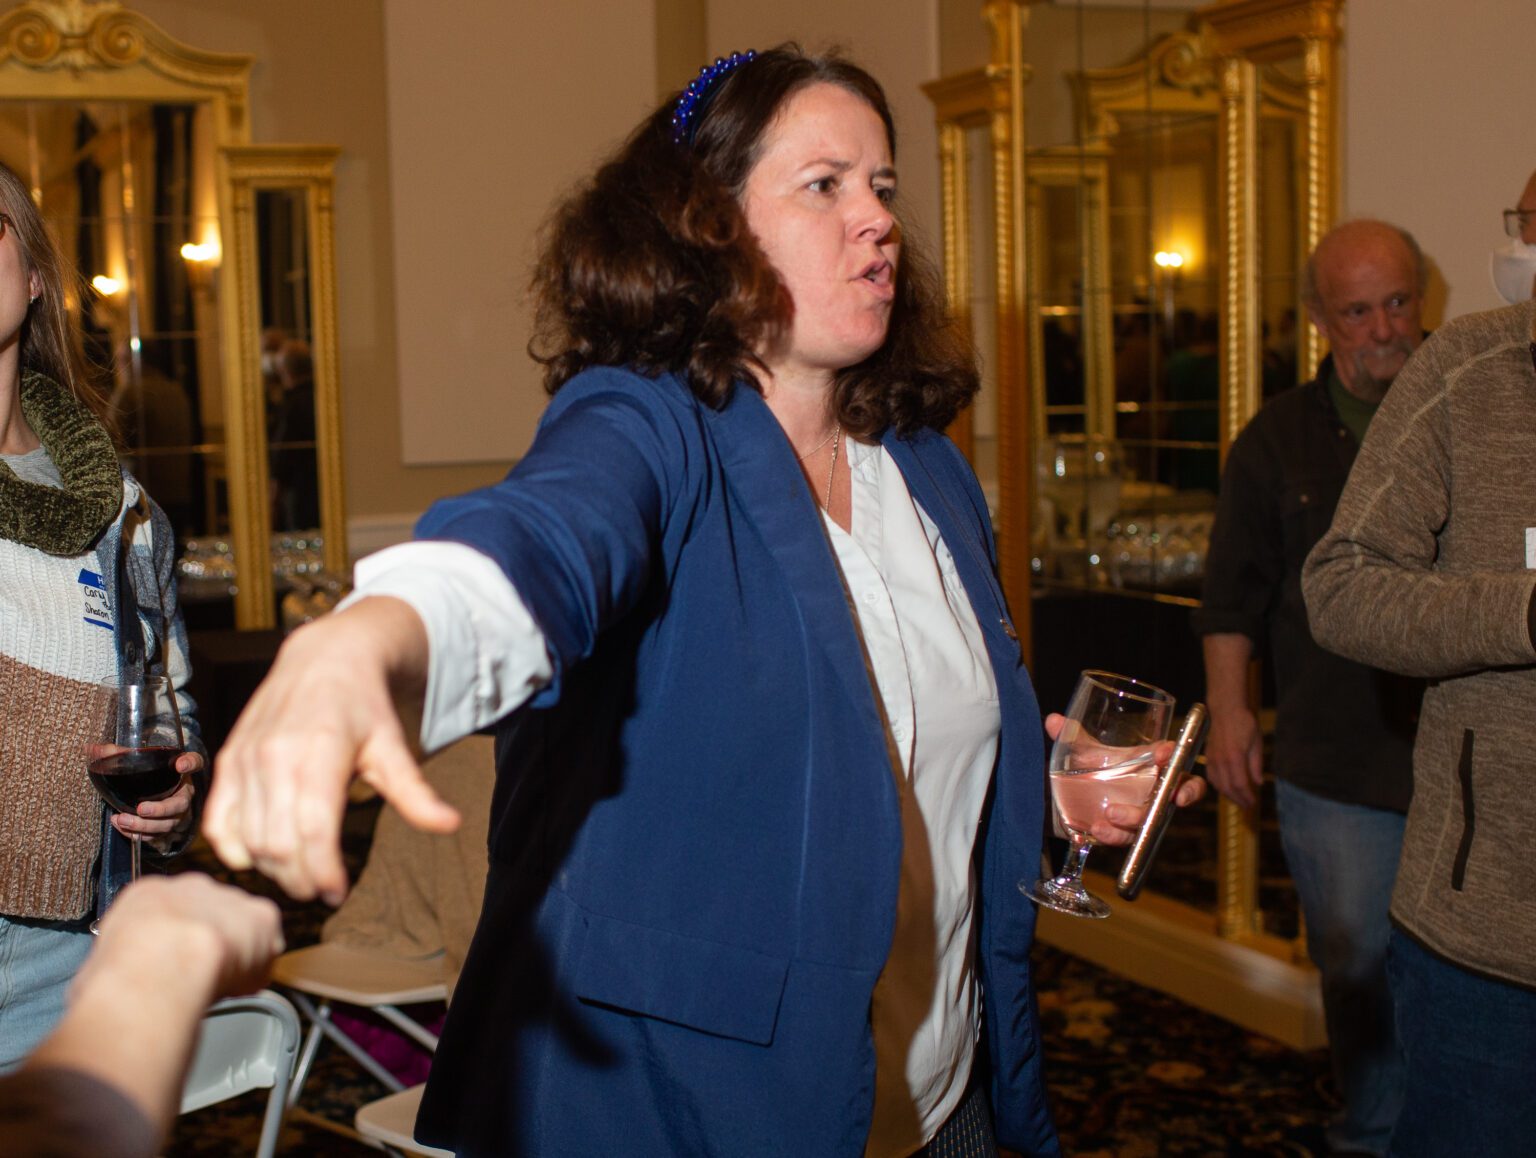 Then-Rep. Sharon Shewmake receives a congratulatory fist bump after receiving the first round of election results at the Hotel Leo on Nov. 8. Shewmake beat incumbent Simon Sefzik in the race for the 42nd District Senate seat.